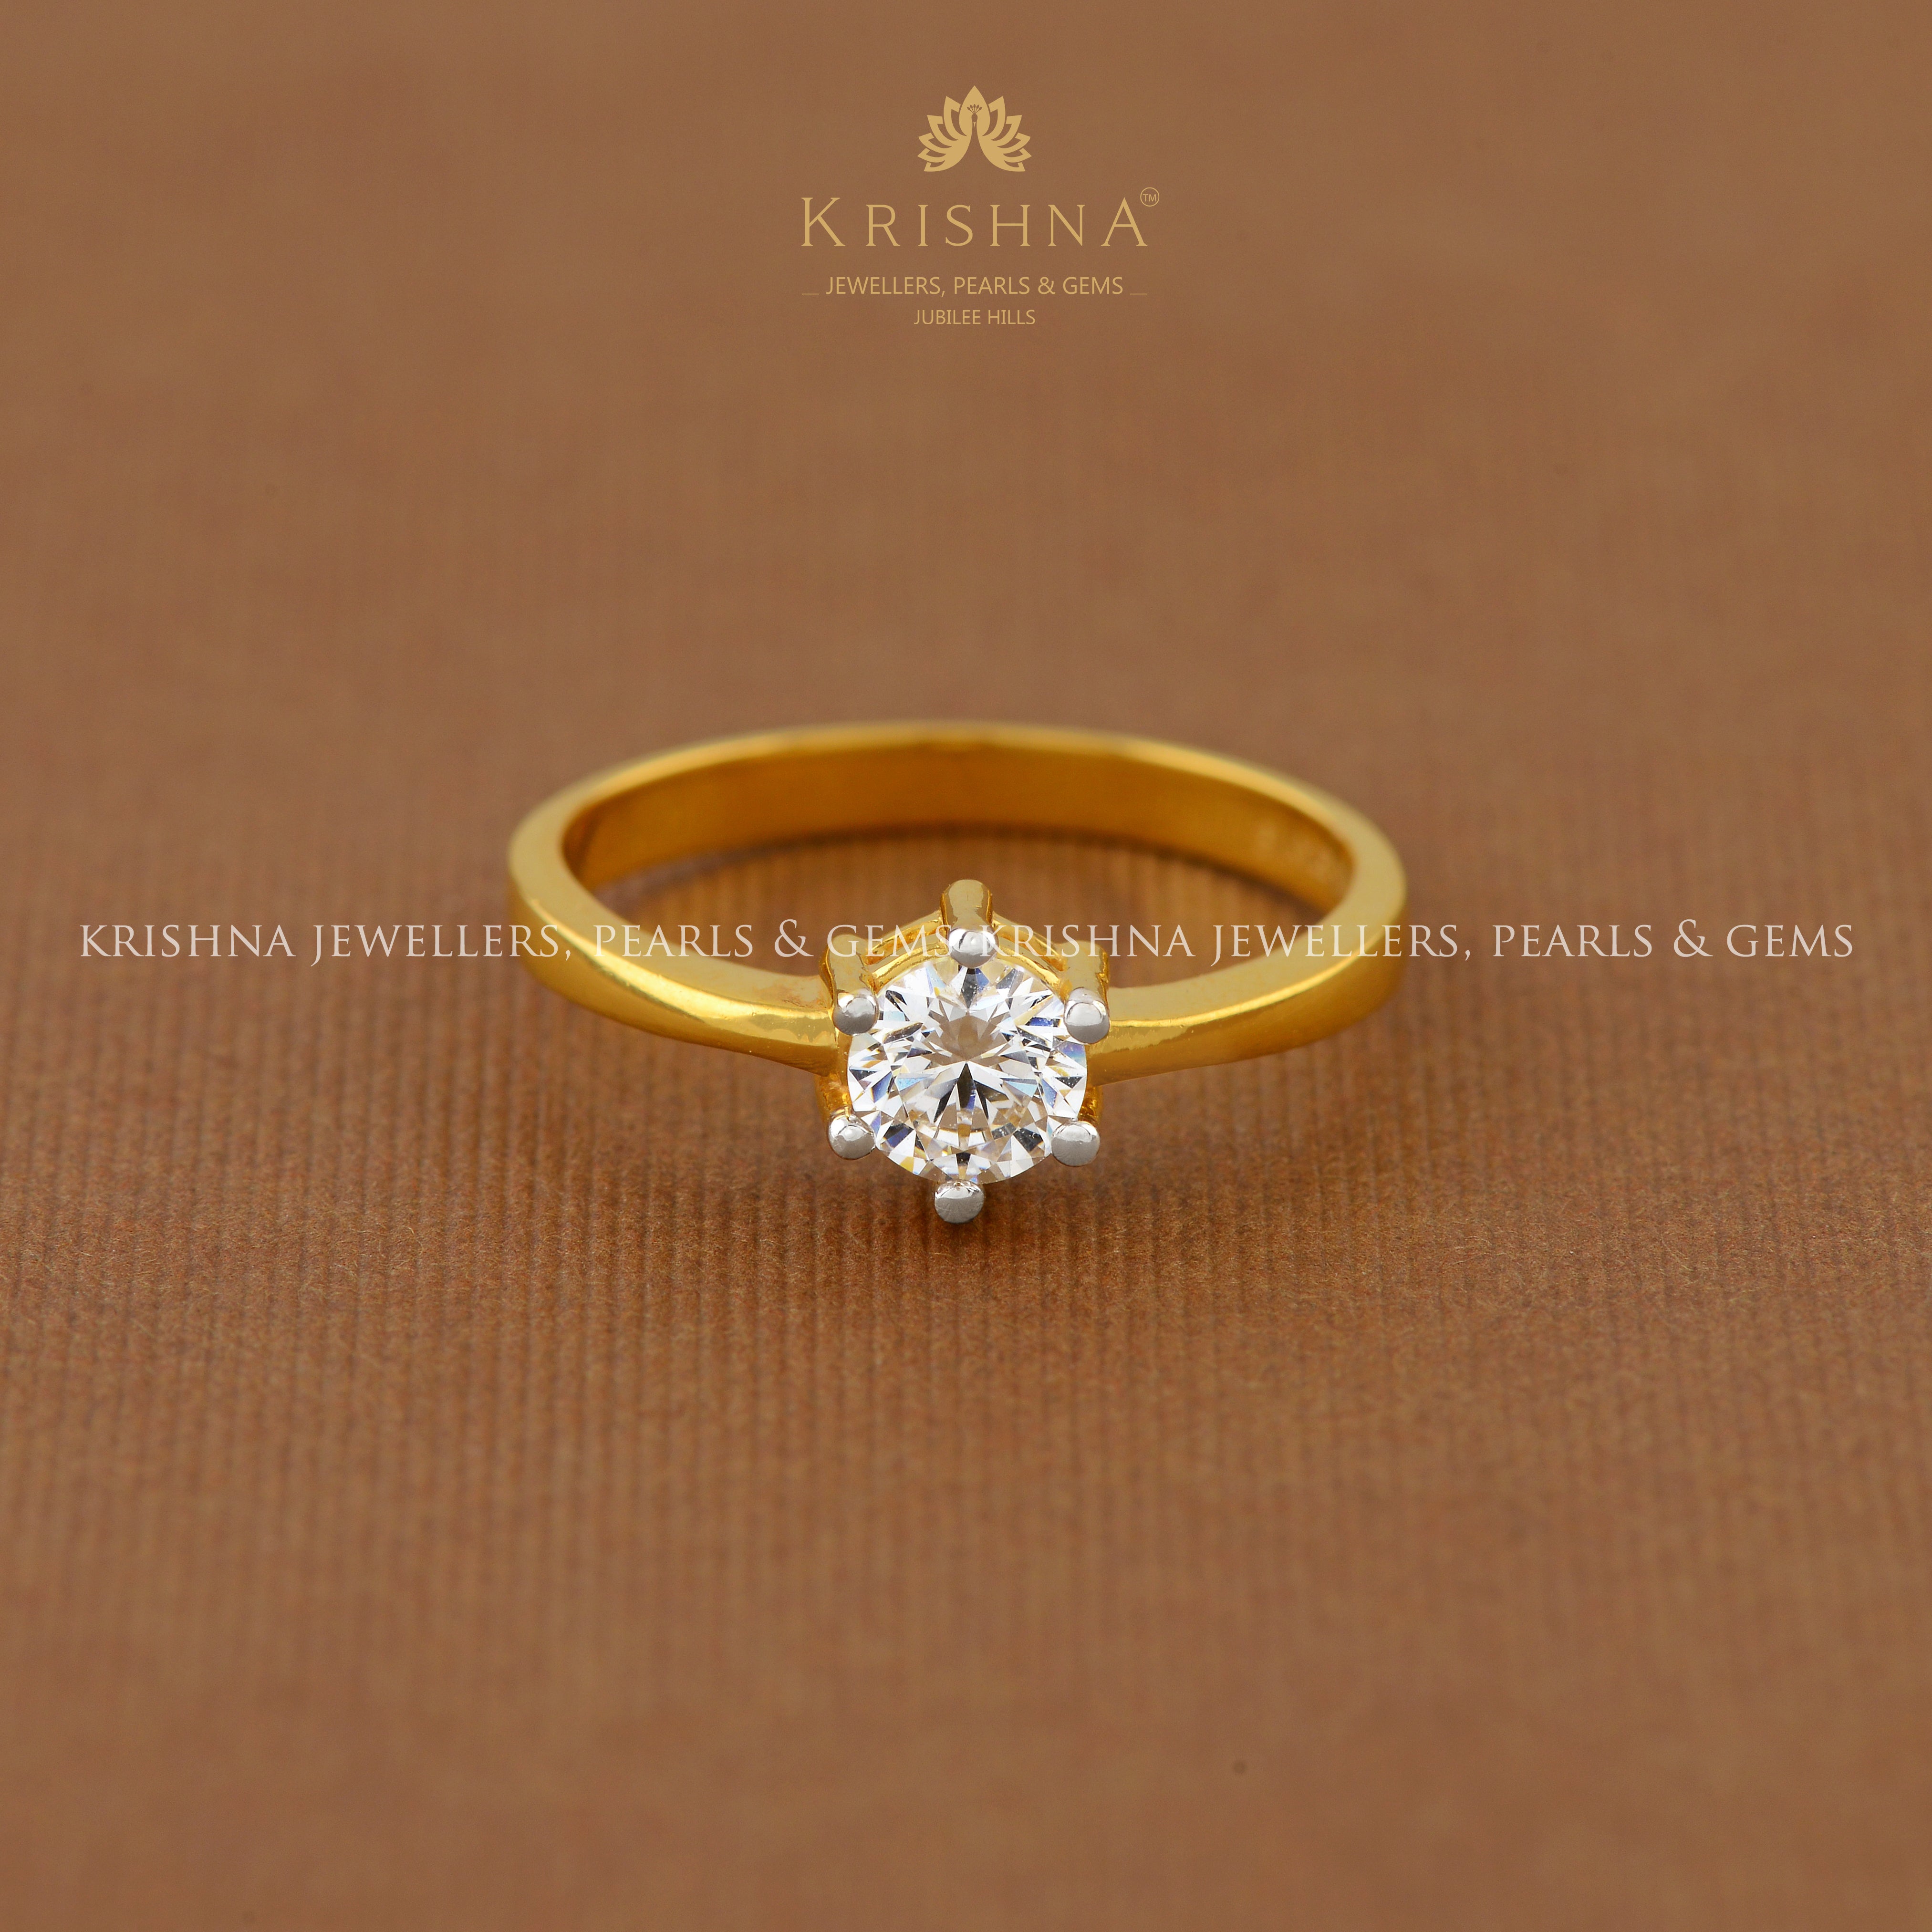 Round Women's unique style natural diamond ladies gold ring gifts ring,  Size: Your Rquierment at Rs 19700 in Surat